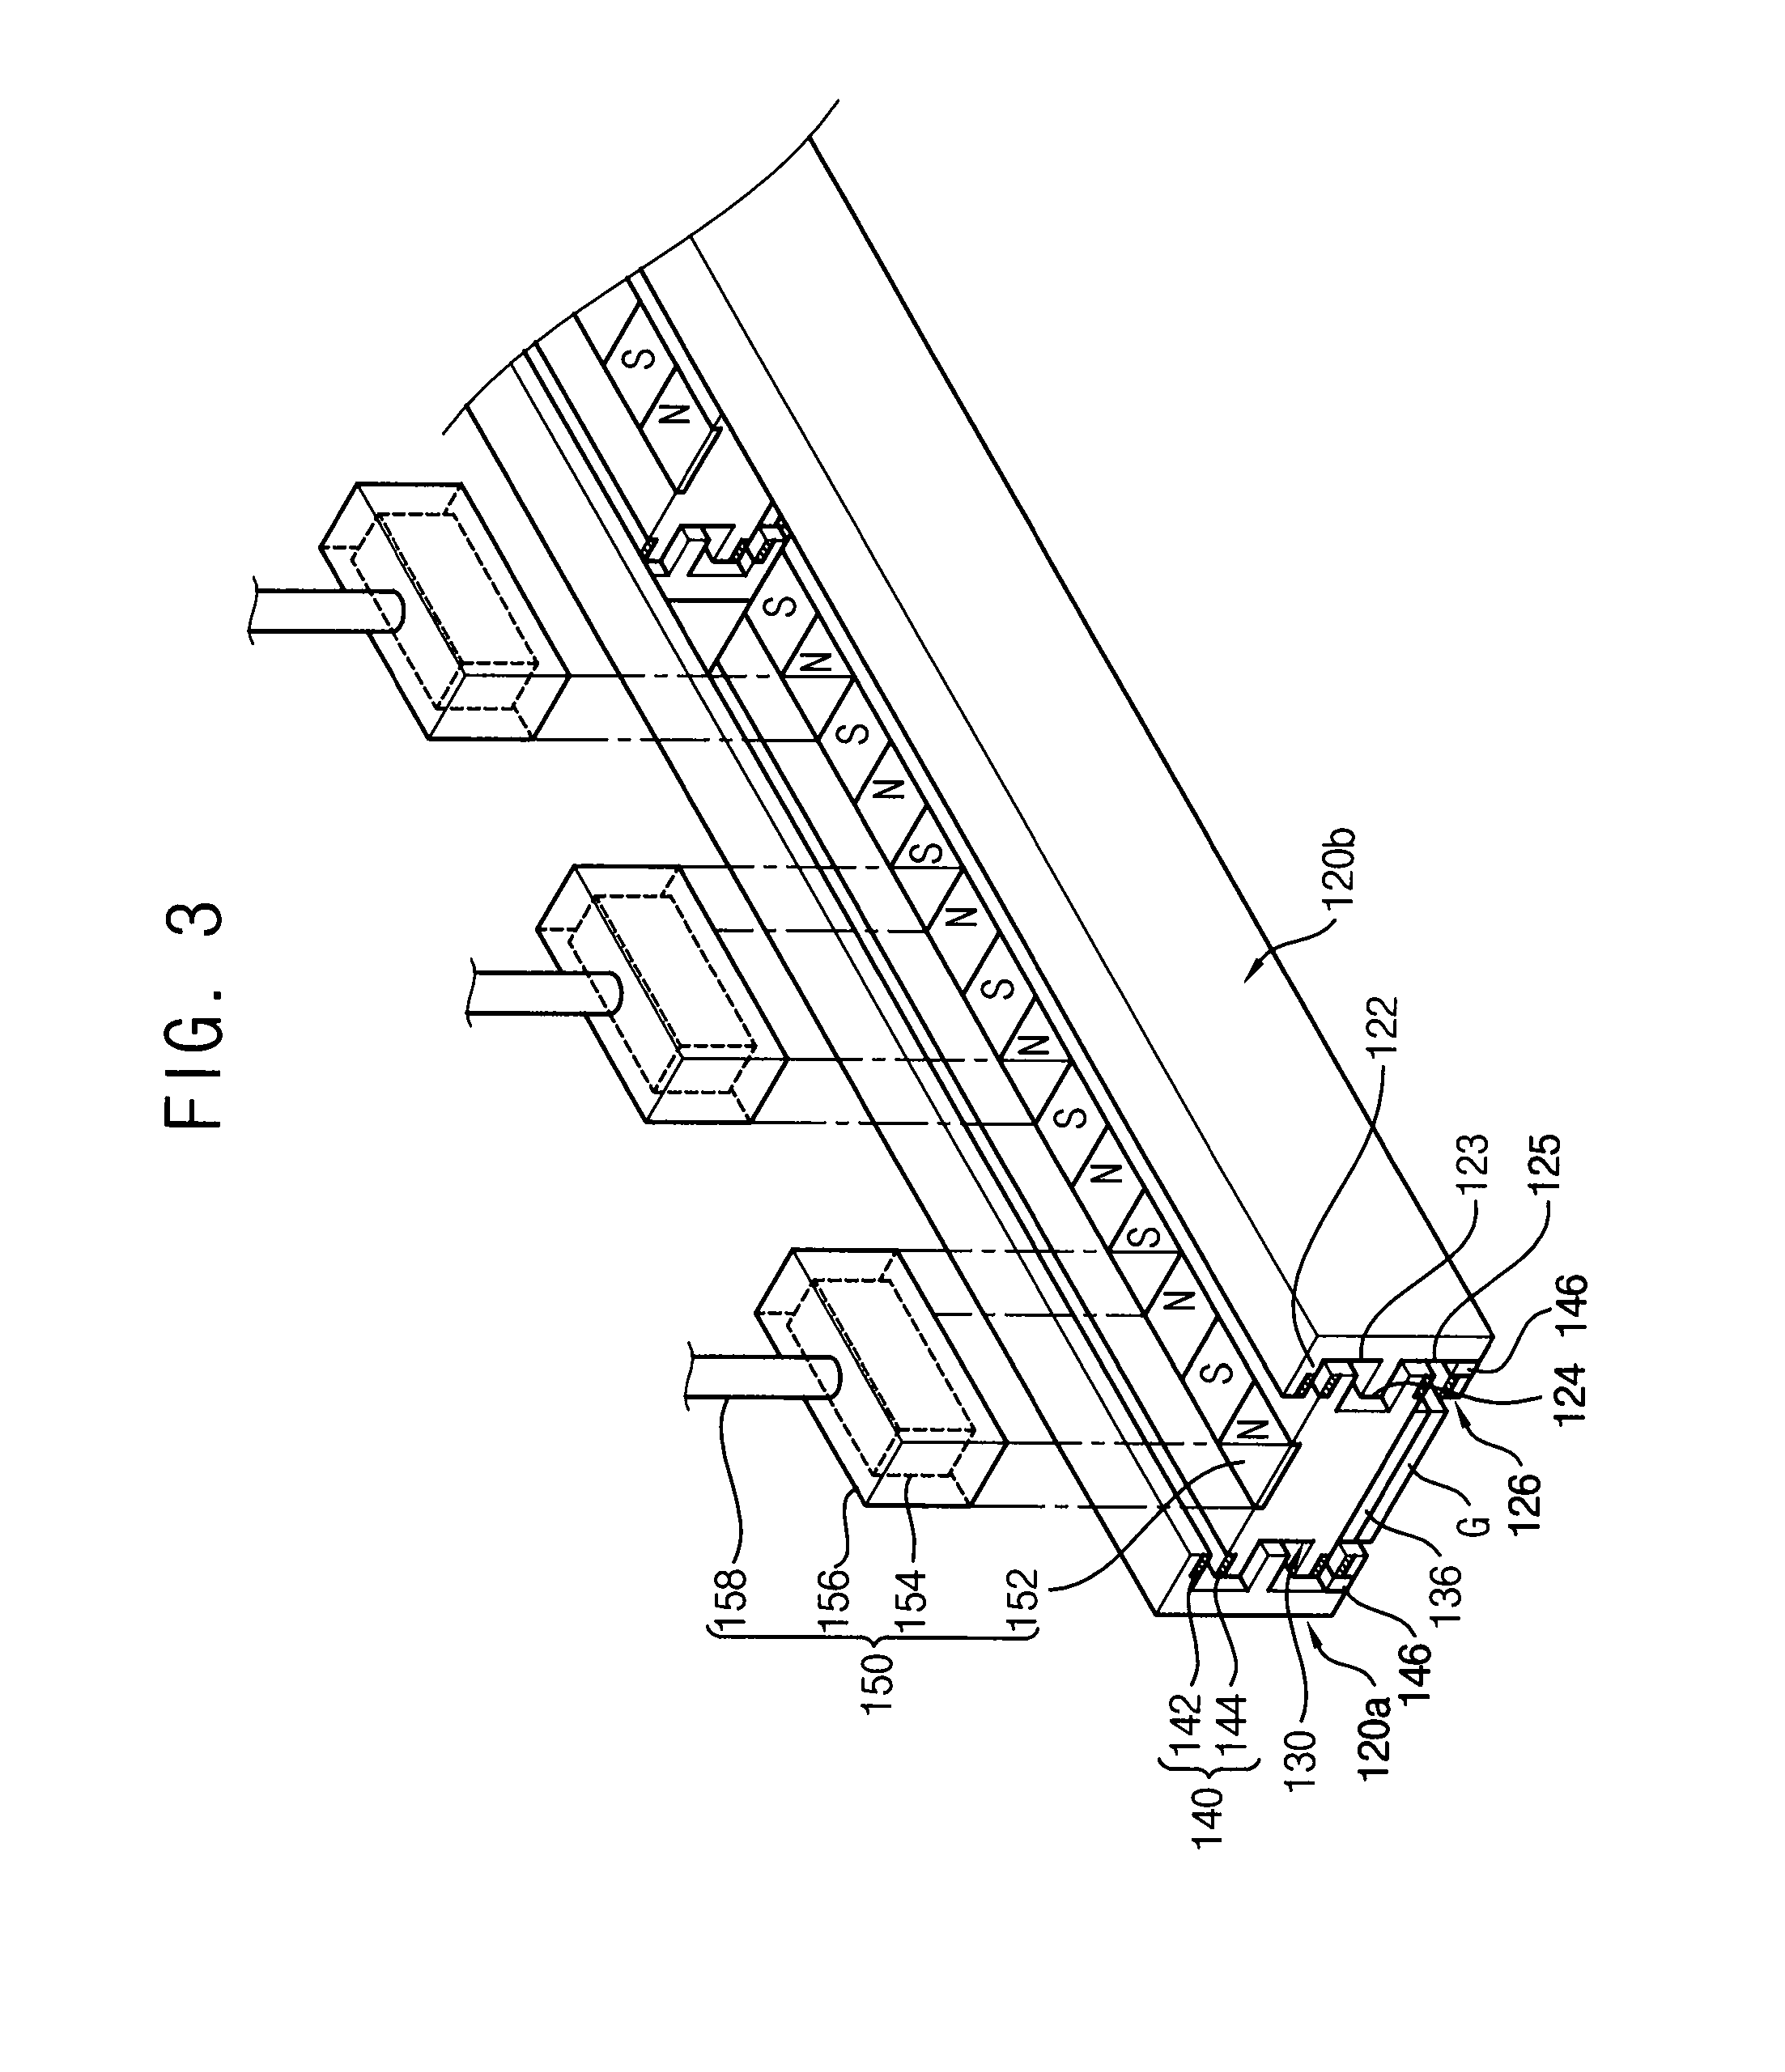 Substrate transfer apparatus and thin film deposition apparatus having the same